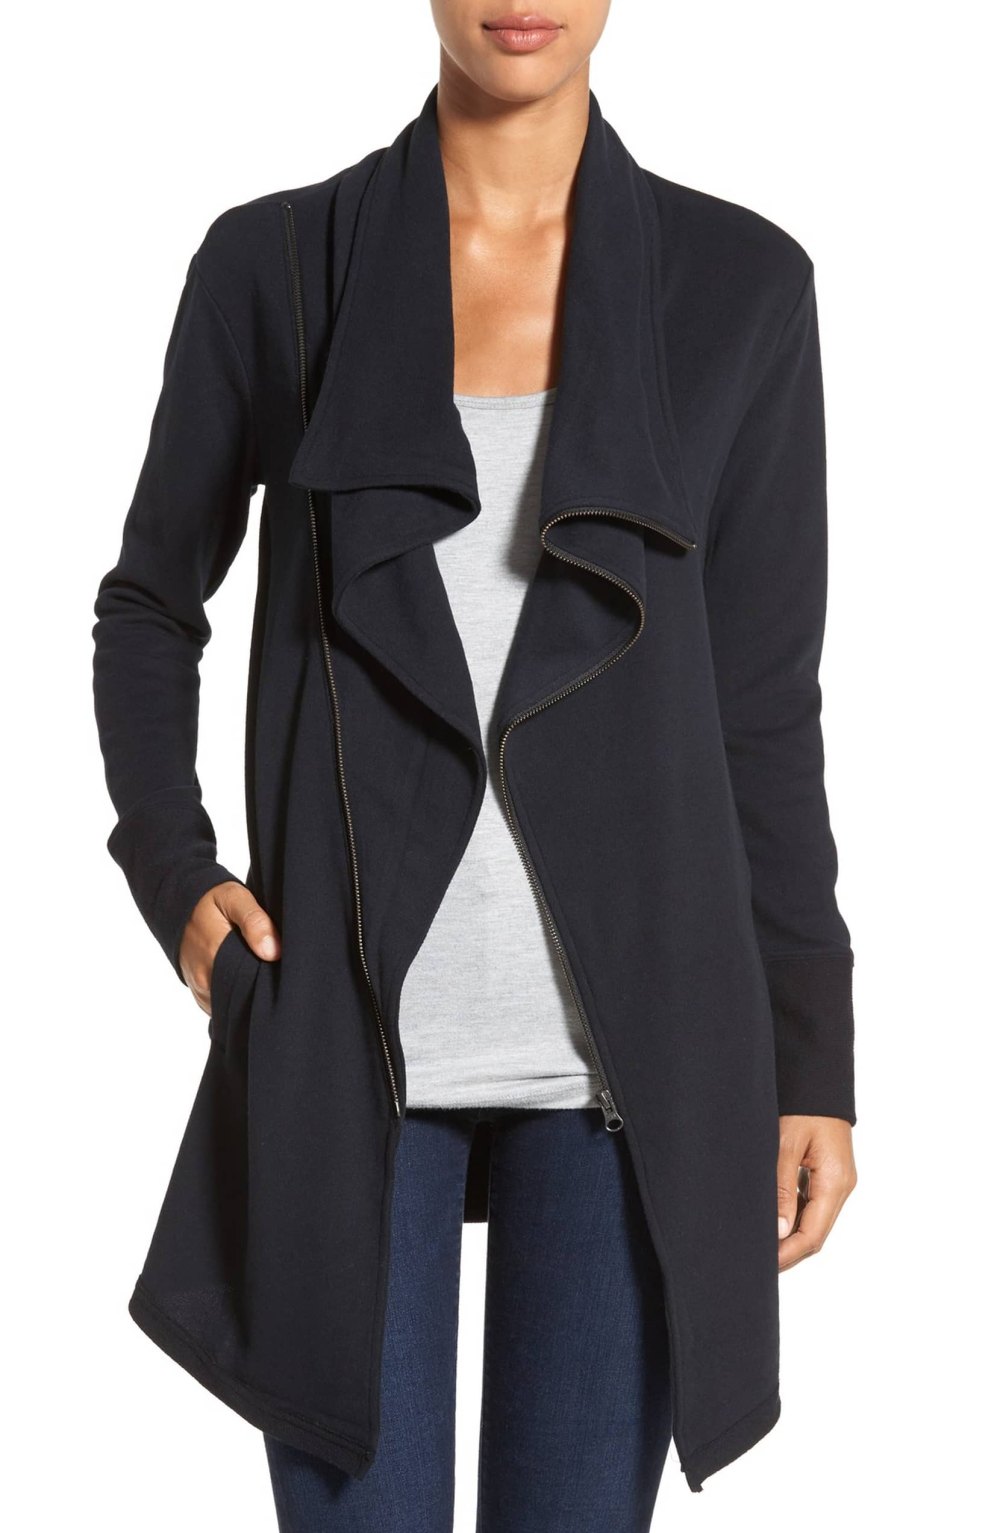 Shop This Comfy Asymmetrical Terry Jacket From Nordstrom | Us Weekly